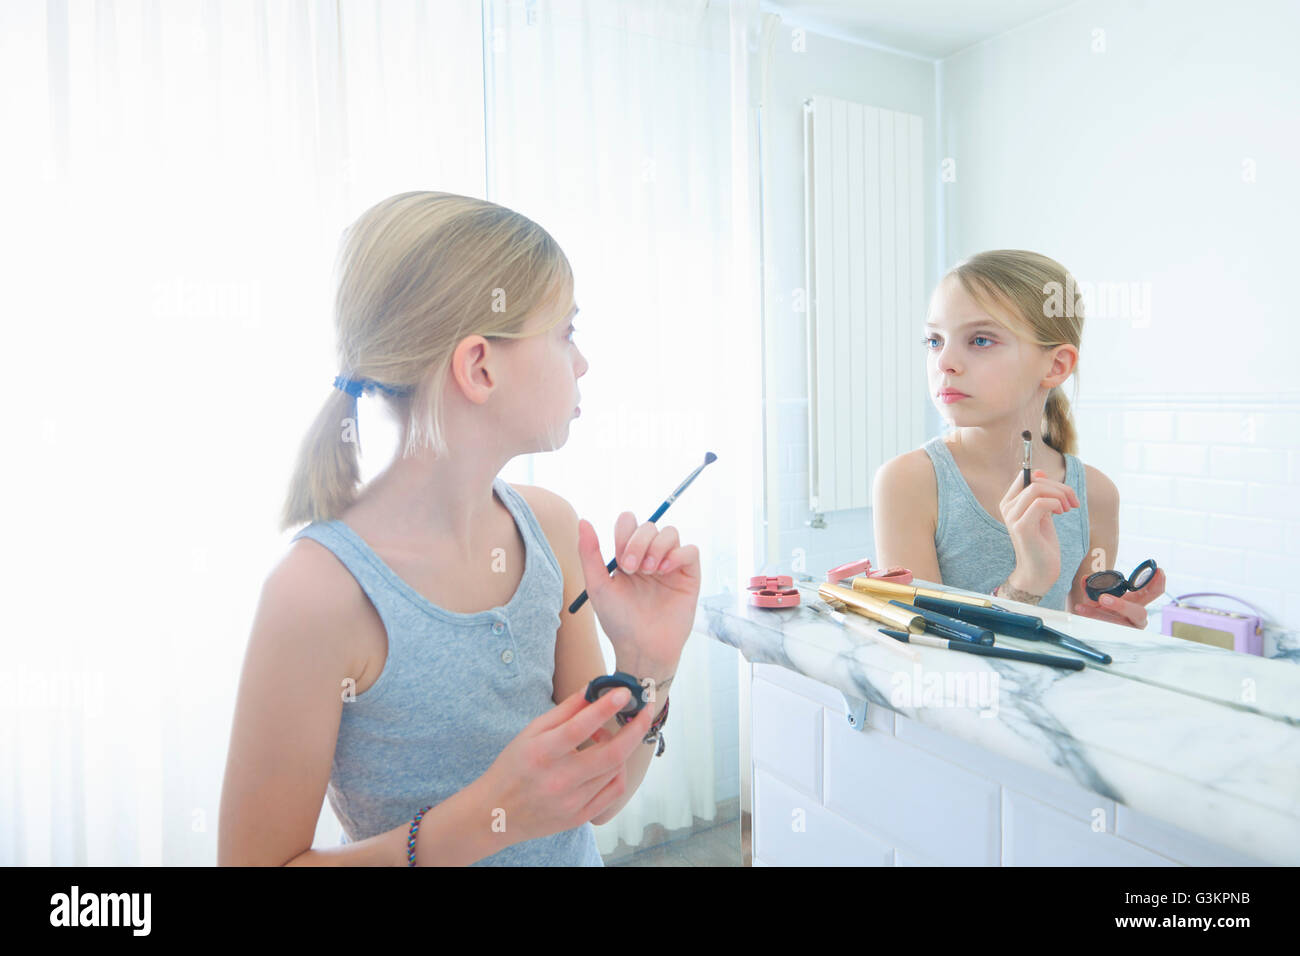 Bedroom mirror image of girl with make up brush staring at herself Stock Photo